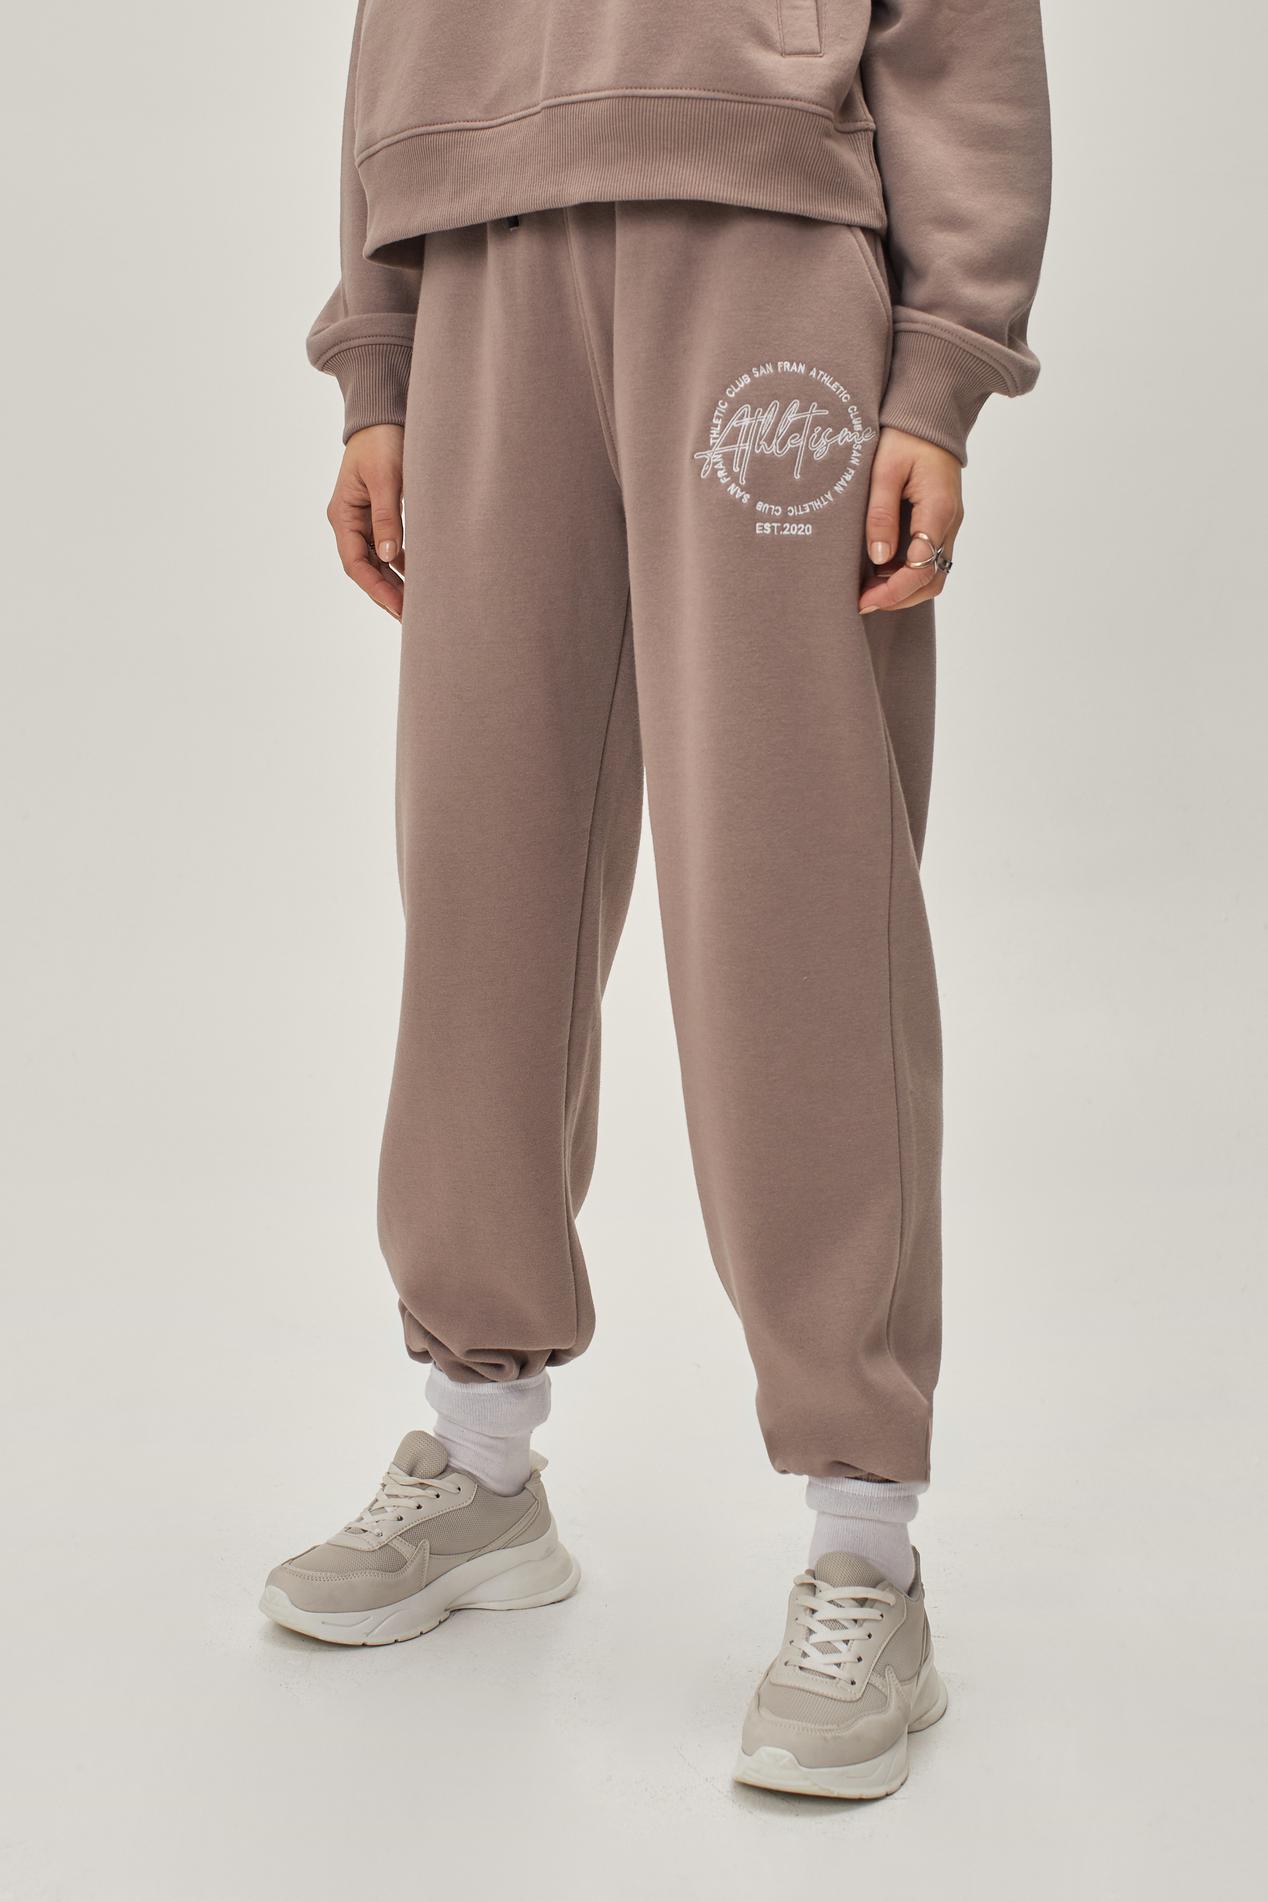 Embroidered Athletisme Relaxed Sweatpants